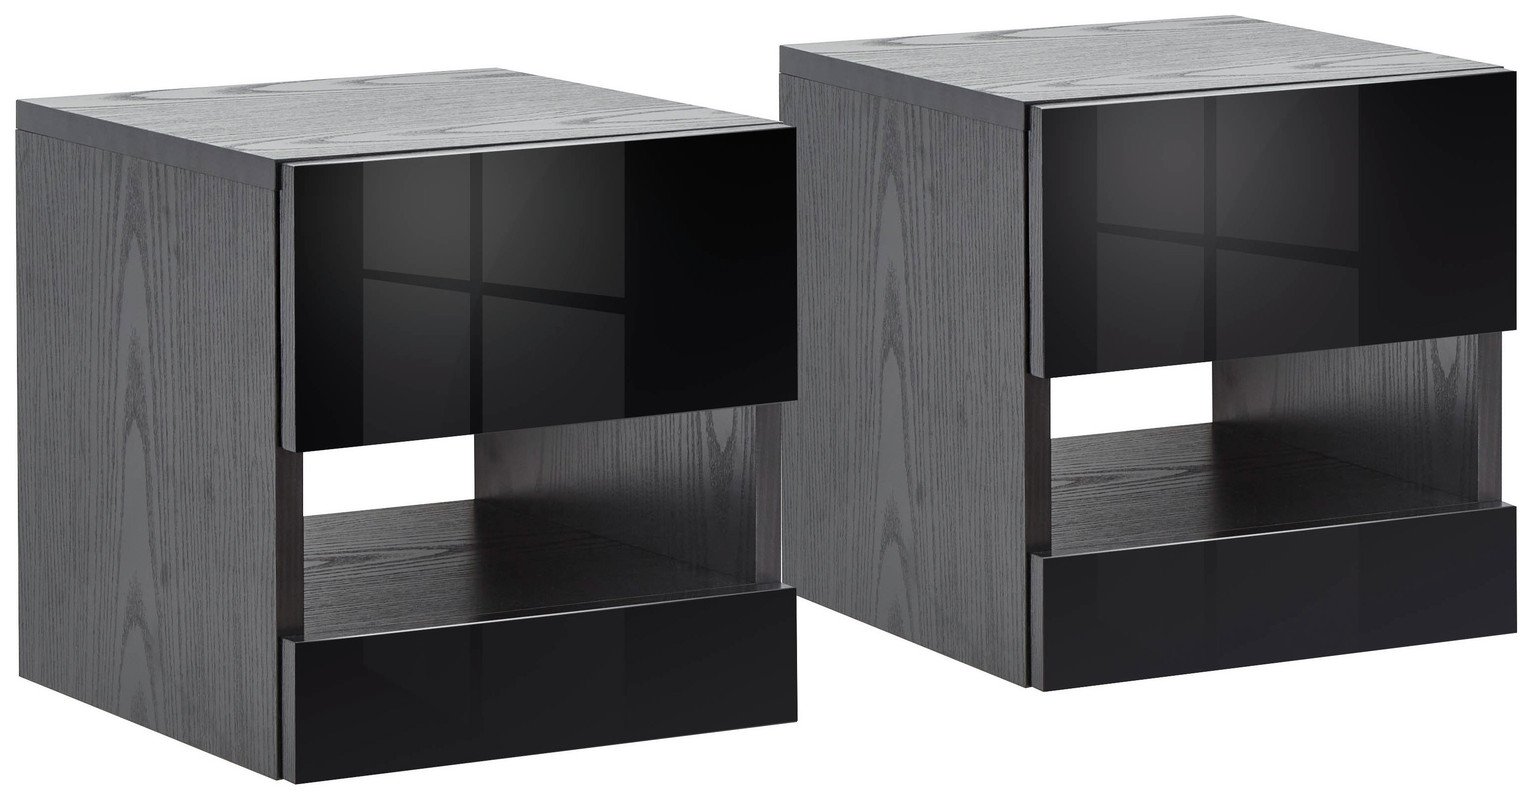 GFW Galicia 2 Wall Mounted Bedside Table Set - Black